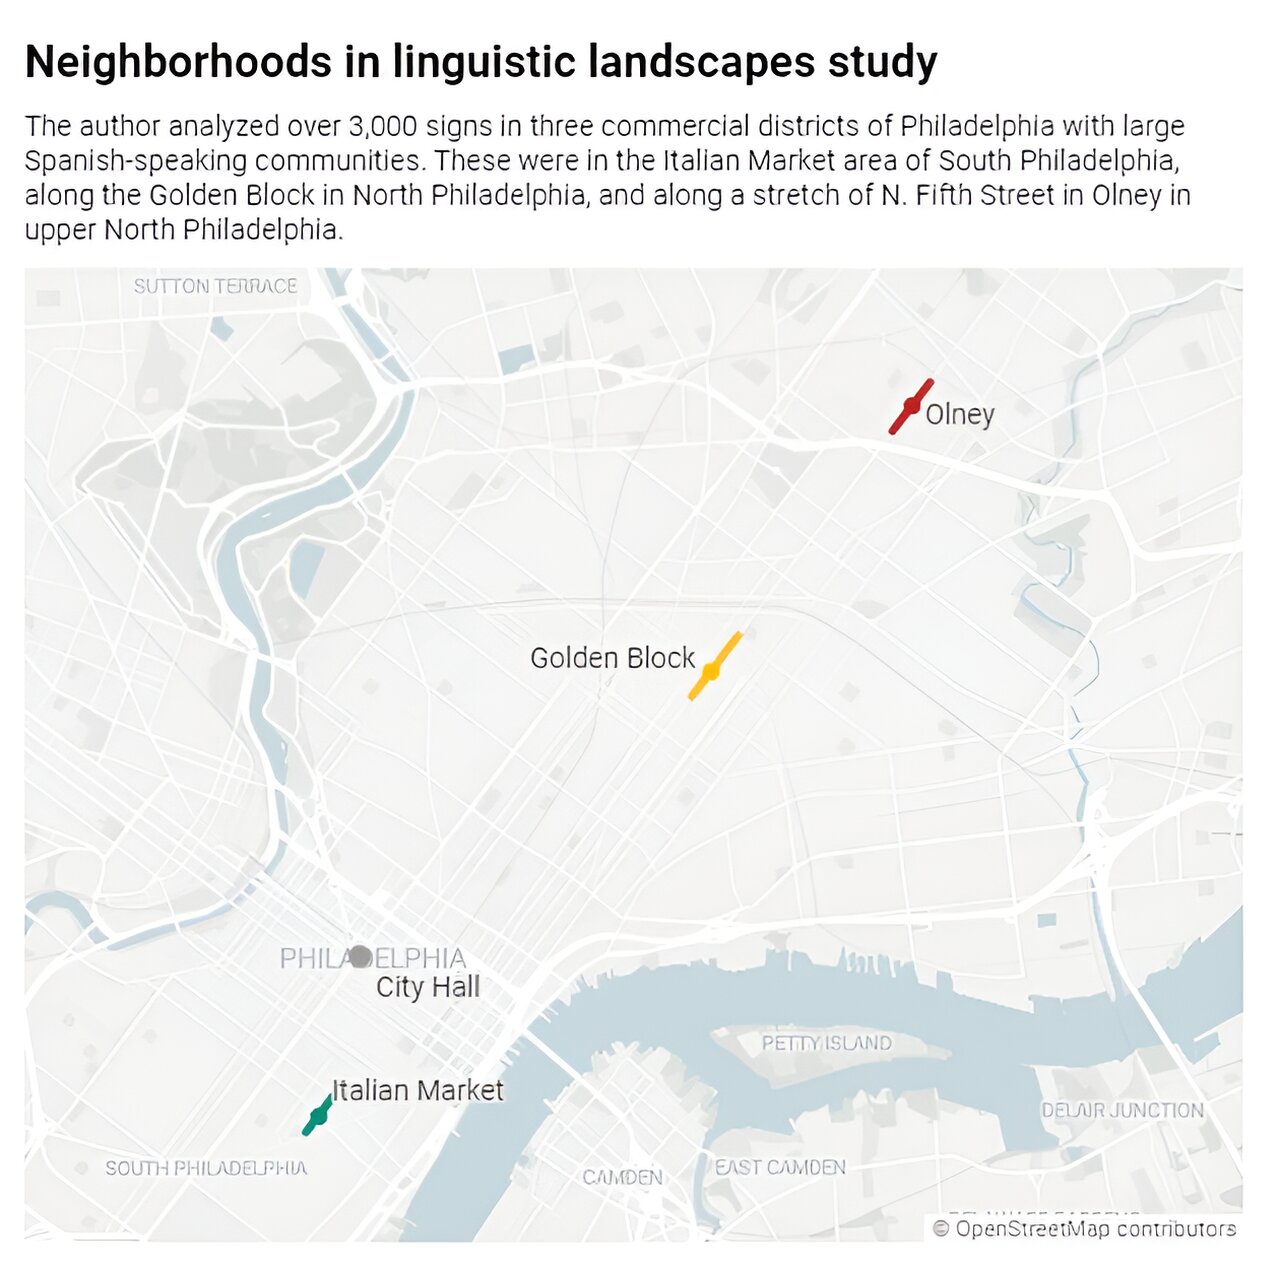 Researcher analyzes 3,356 signs to see how language use is changing in three Latino neighborhoods in Philly